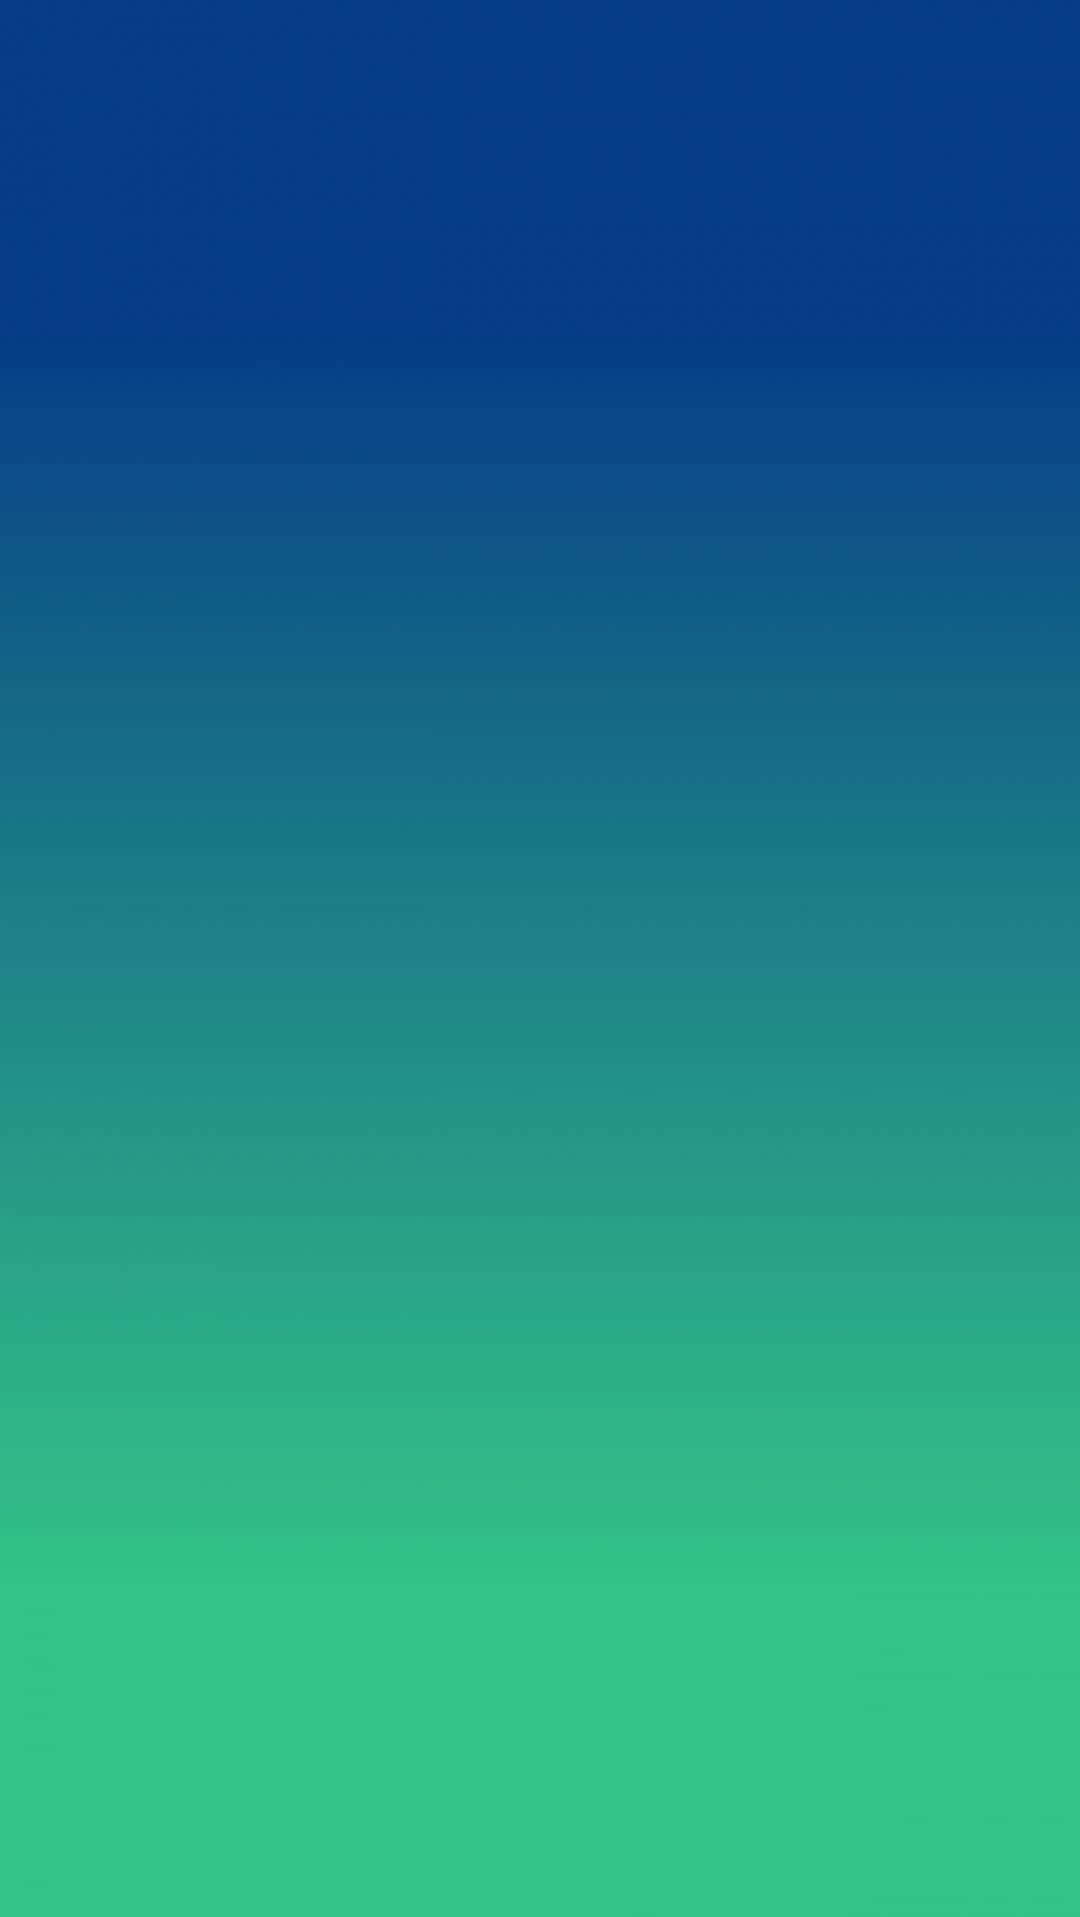 Solid Background Blue Green Ombre Color Wallpaper